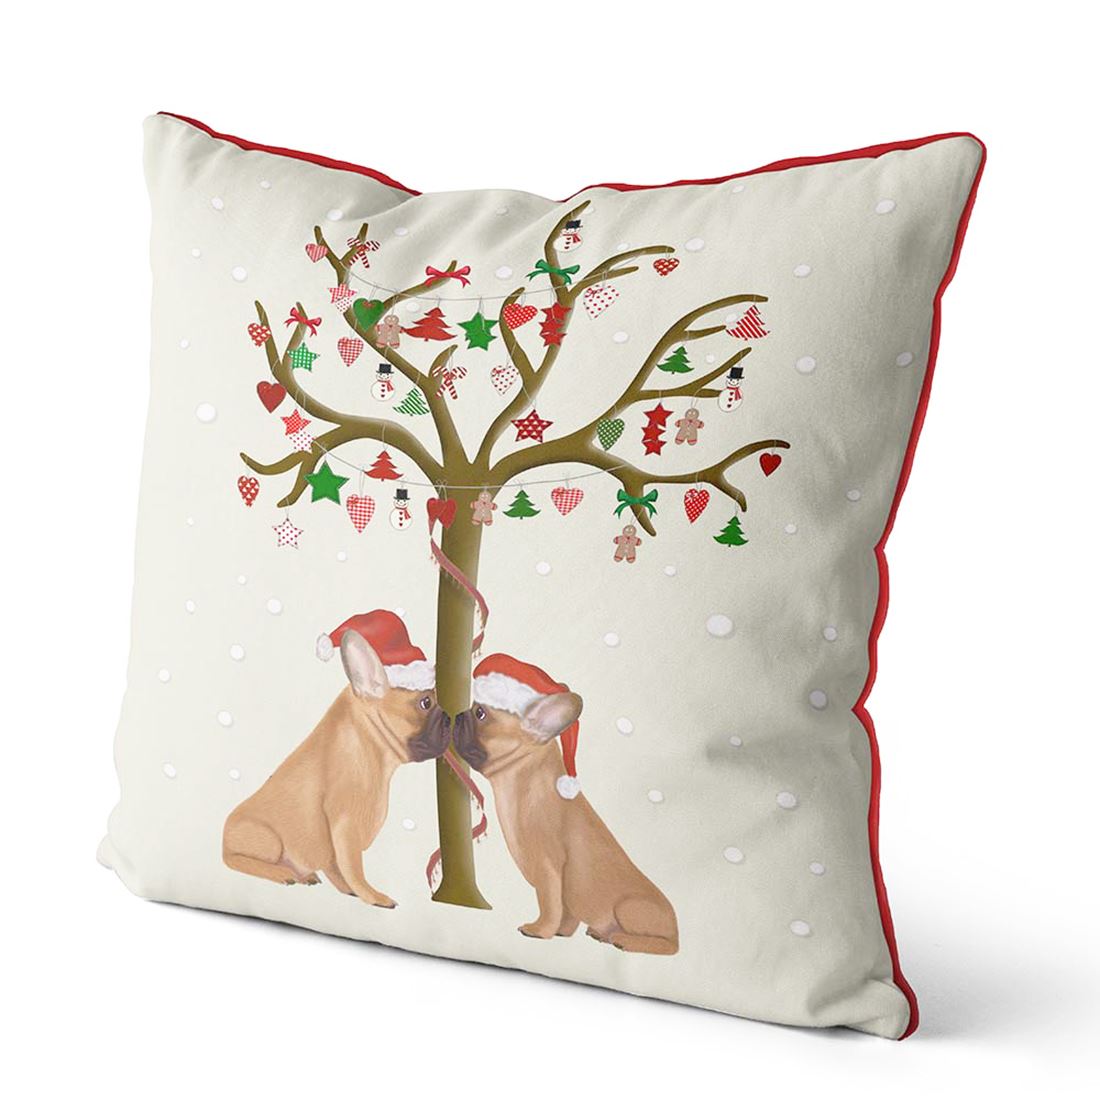 Kelly Stevens-McLaughlan, French Bulldogs and Christmas Tree Holiday Pillow / Cushion Cover, 18